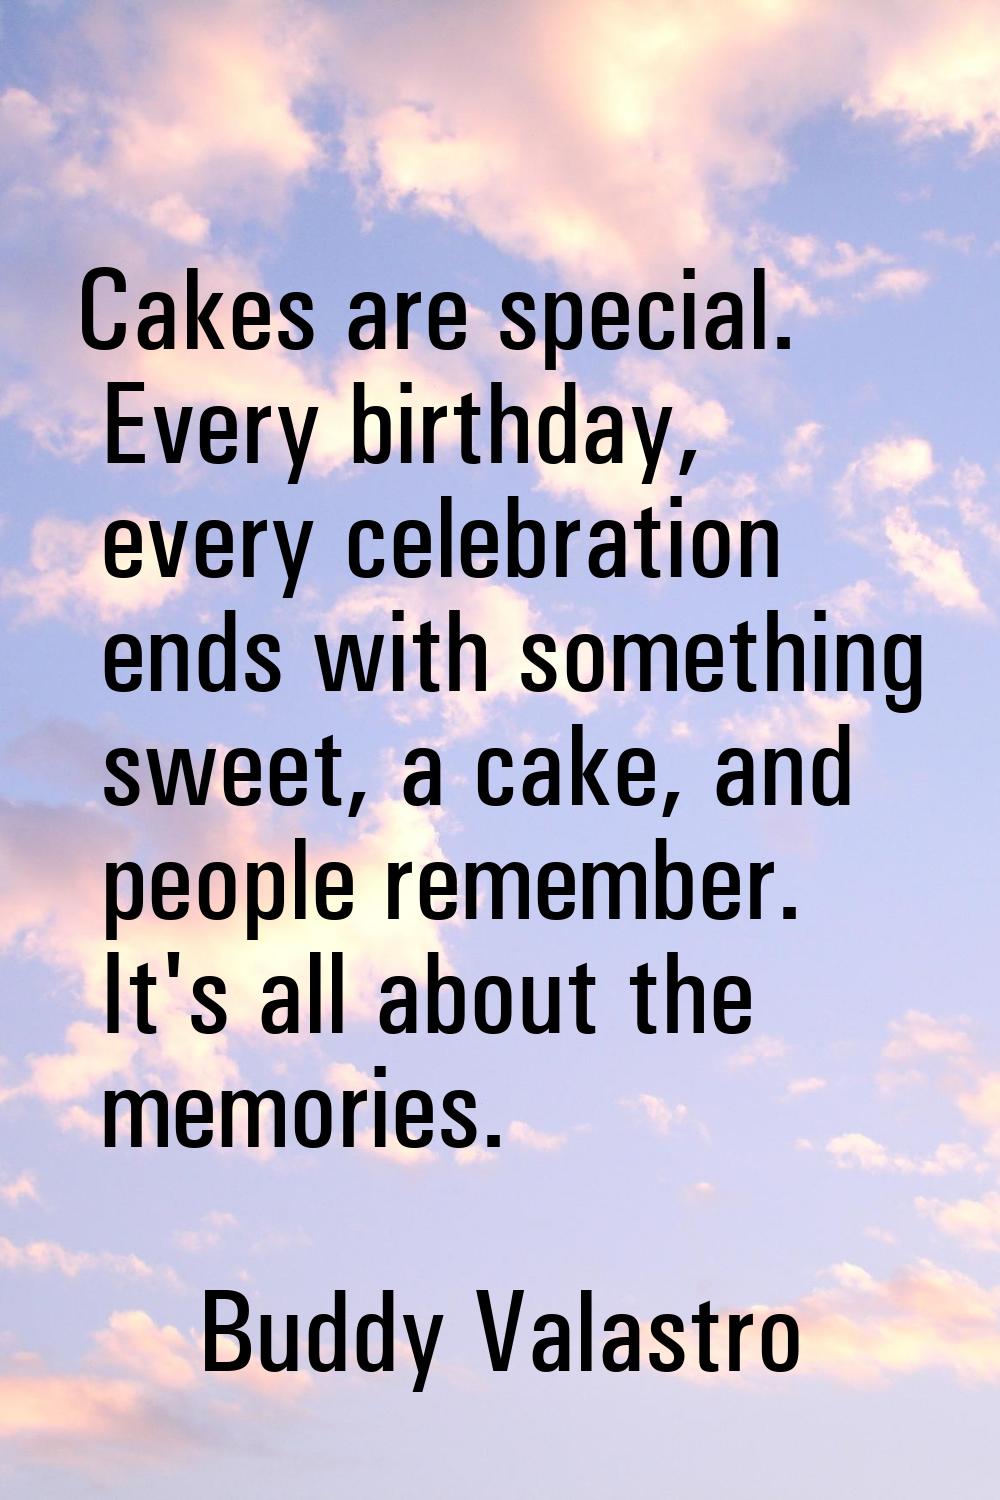 Cakes are special. Every birthday, every celebration ends with something sweet, a cake, and people 